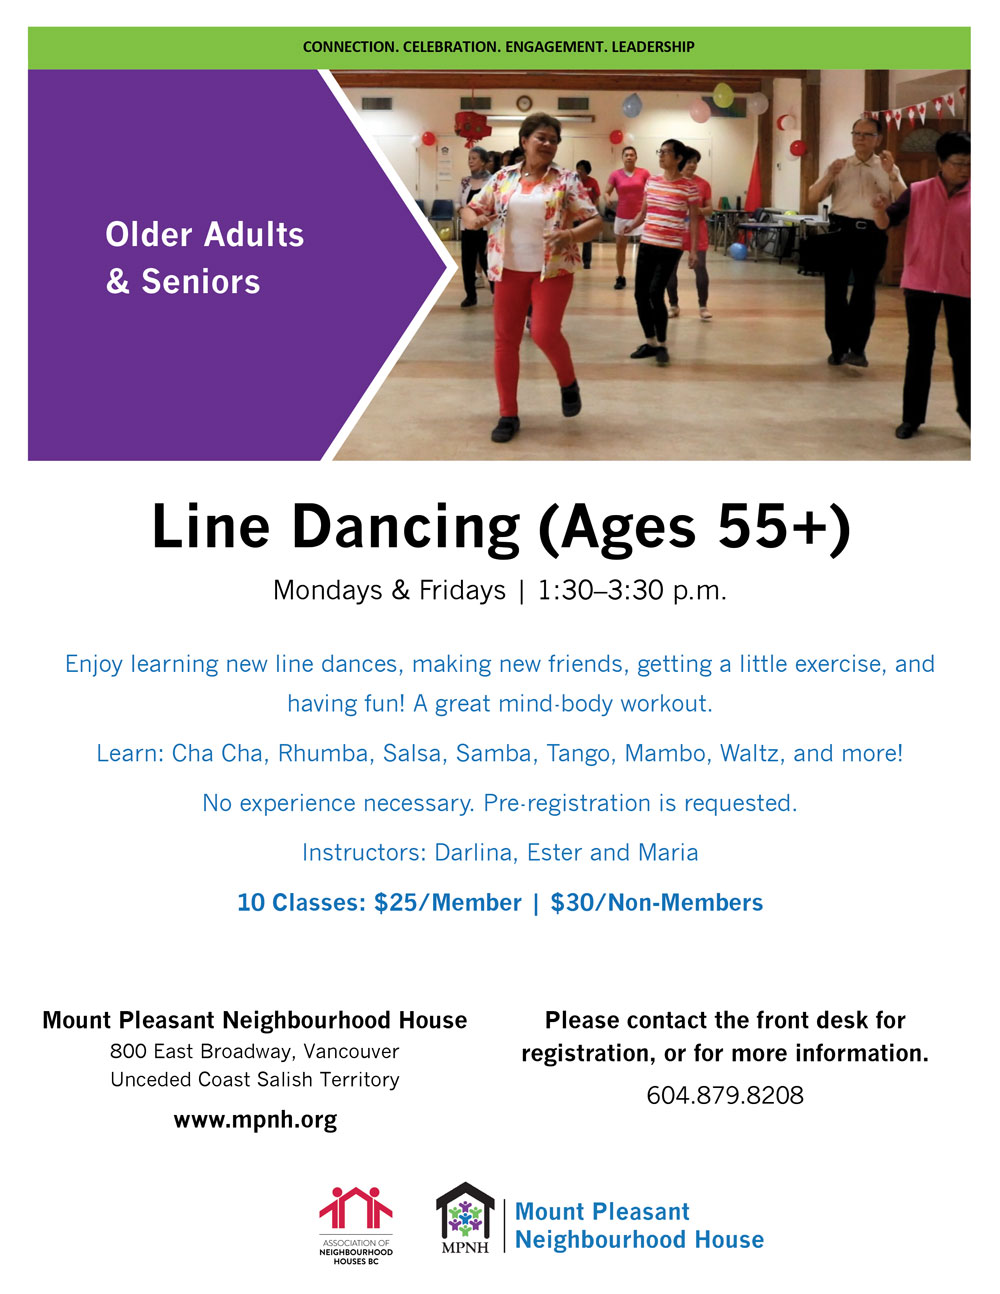 An image of the poster with program details, featuring a photo of seniors line dancing together